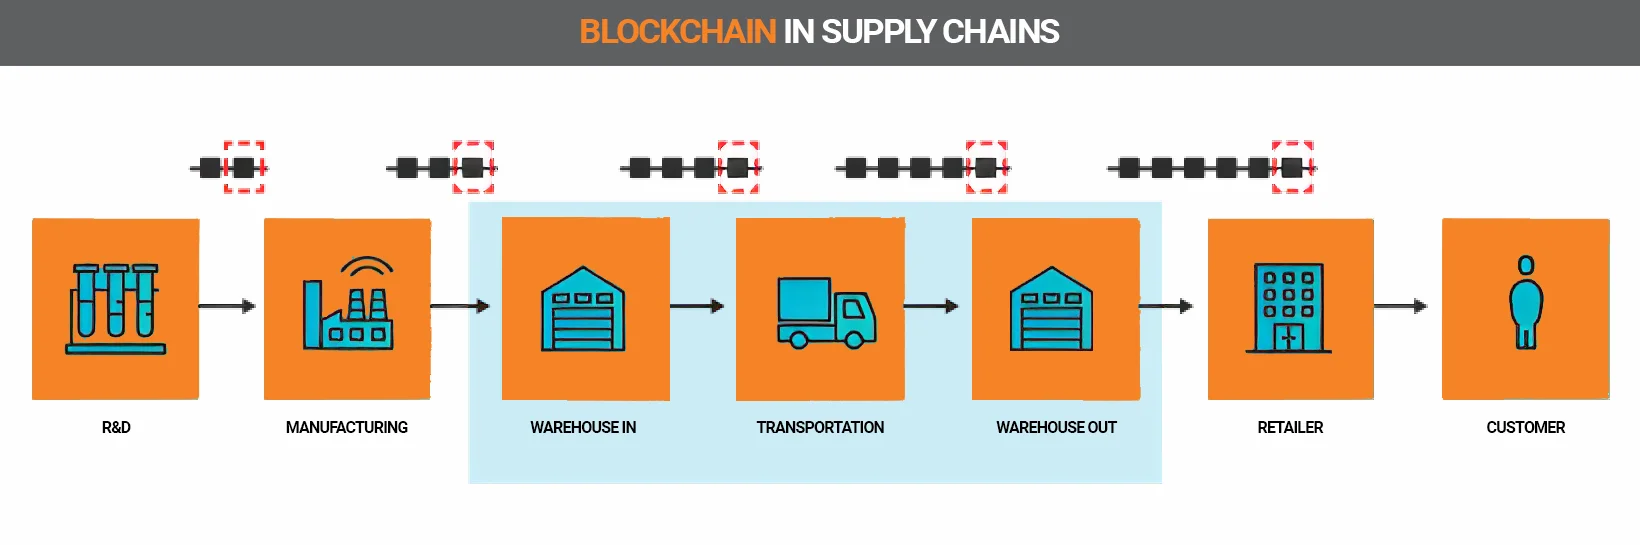 Supply chains on the blockchain.